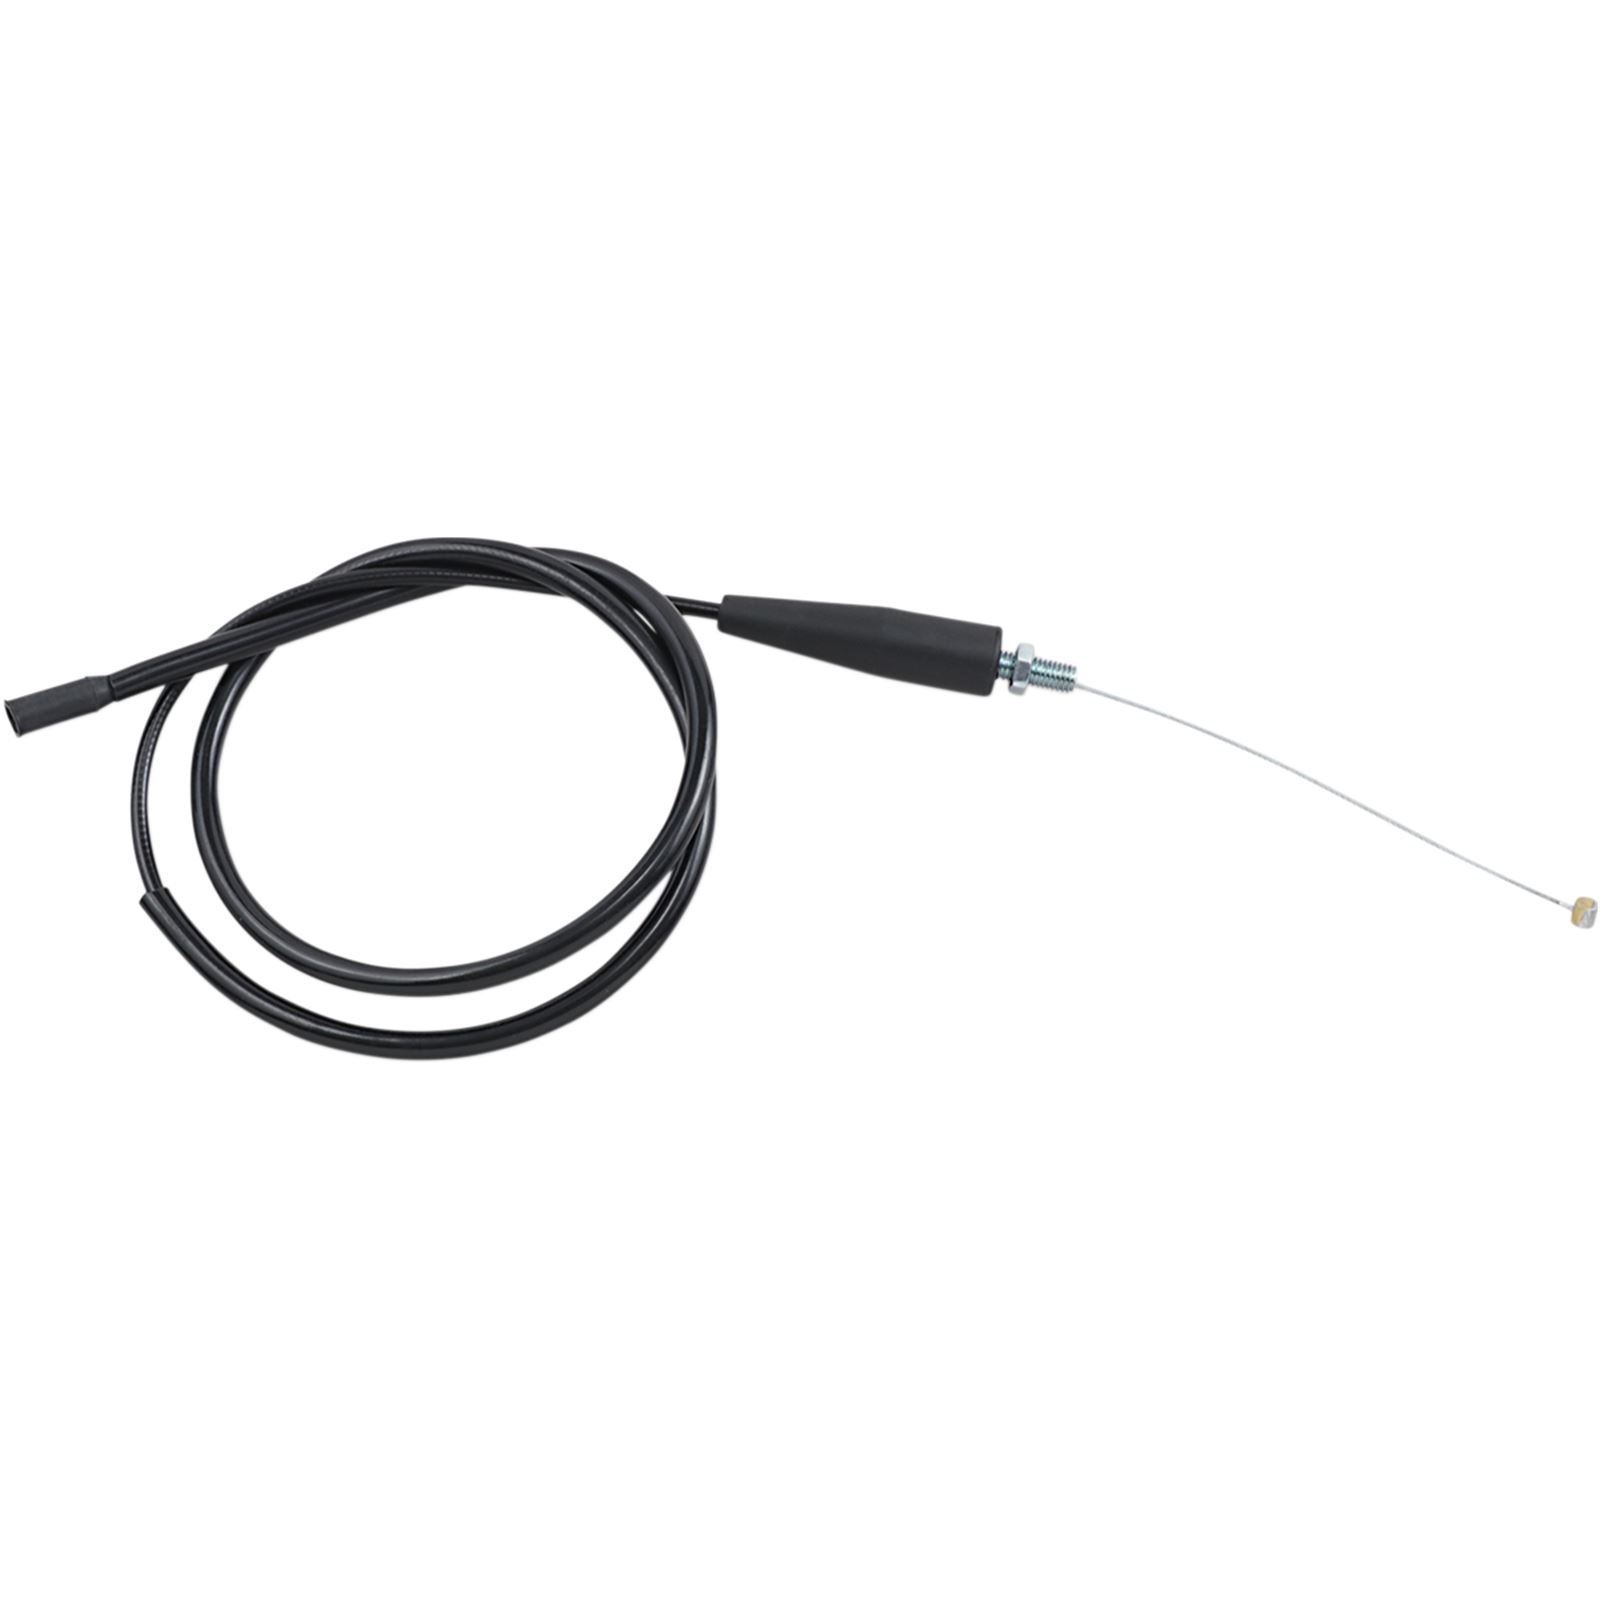 Motion Pro Throttle Cable for BA01-0510